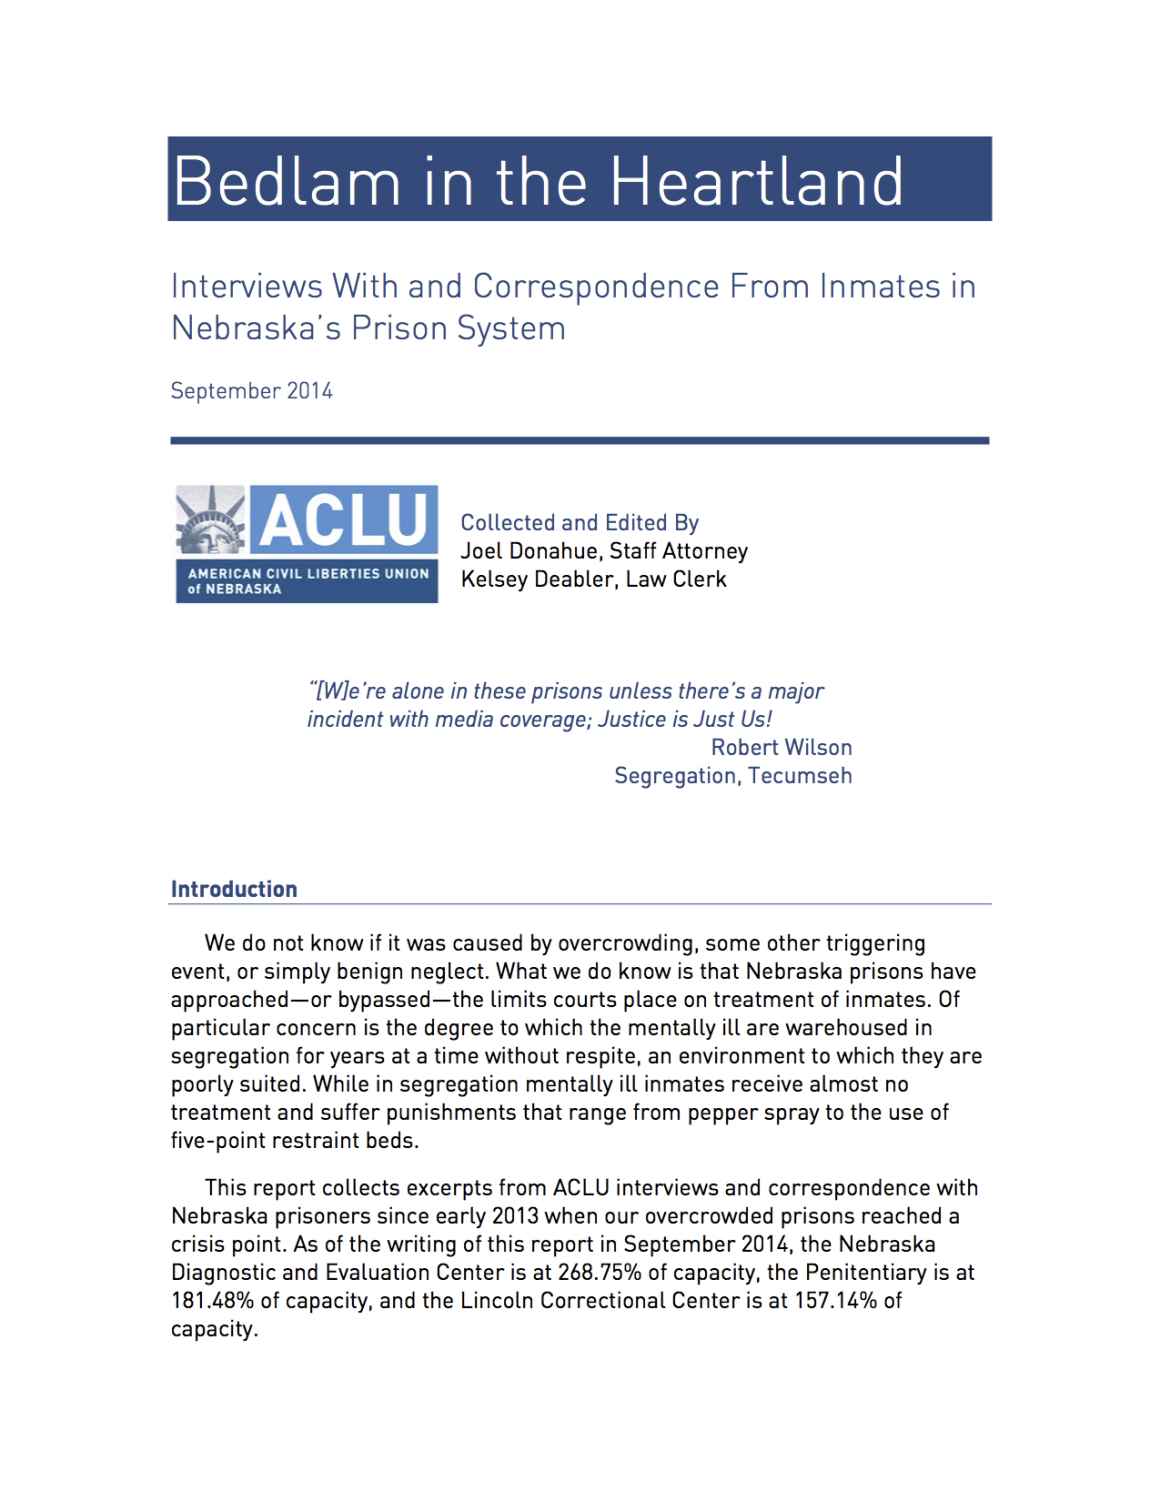 Bedlam in the Heartland report cover